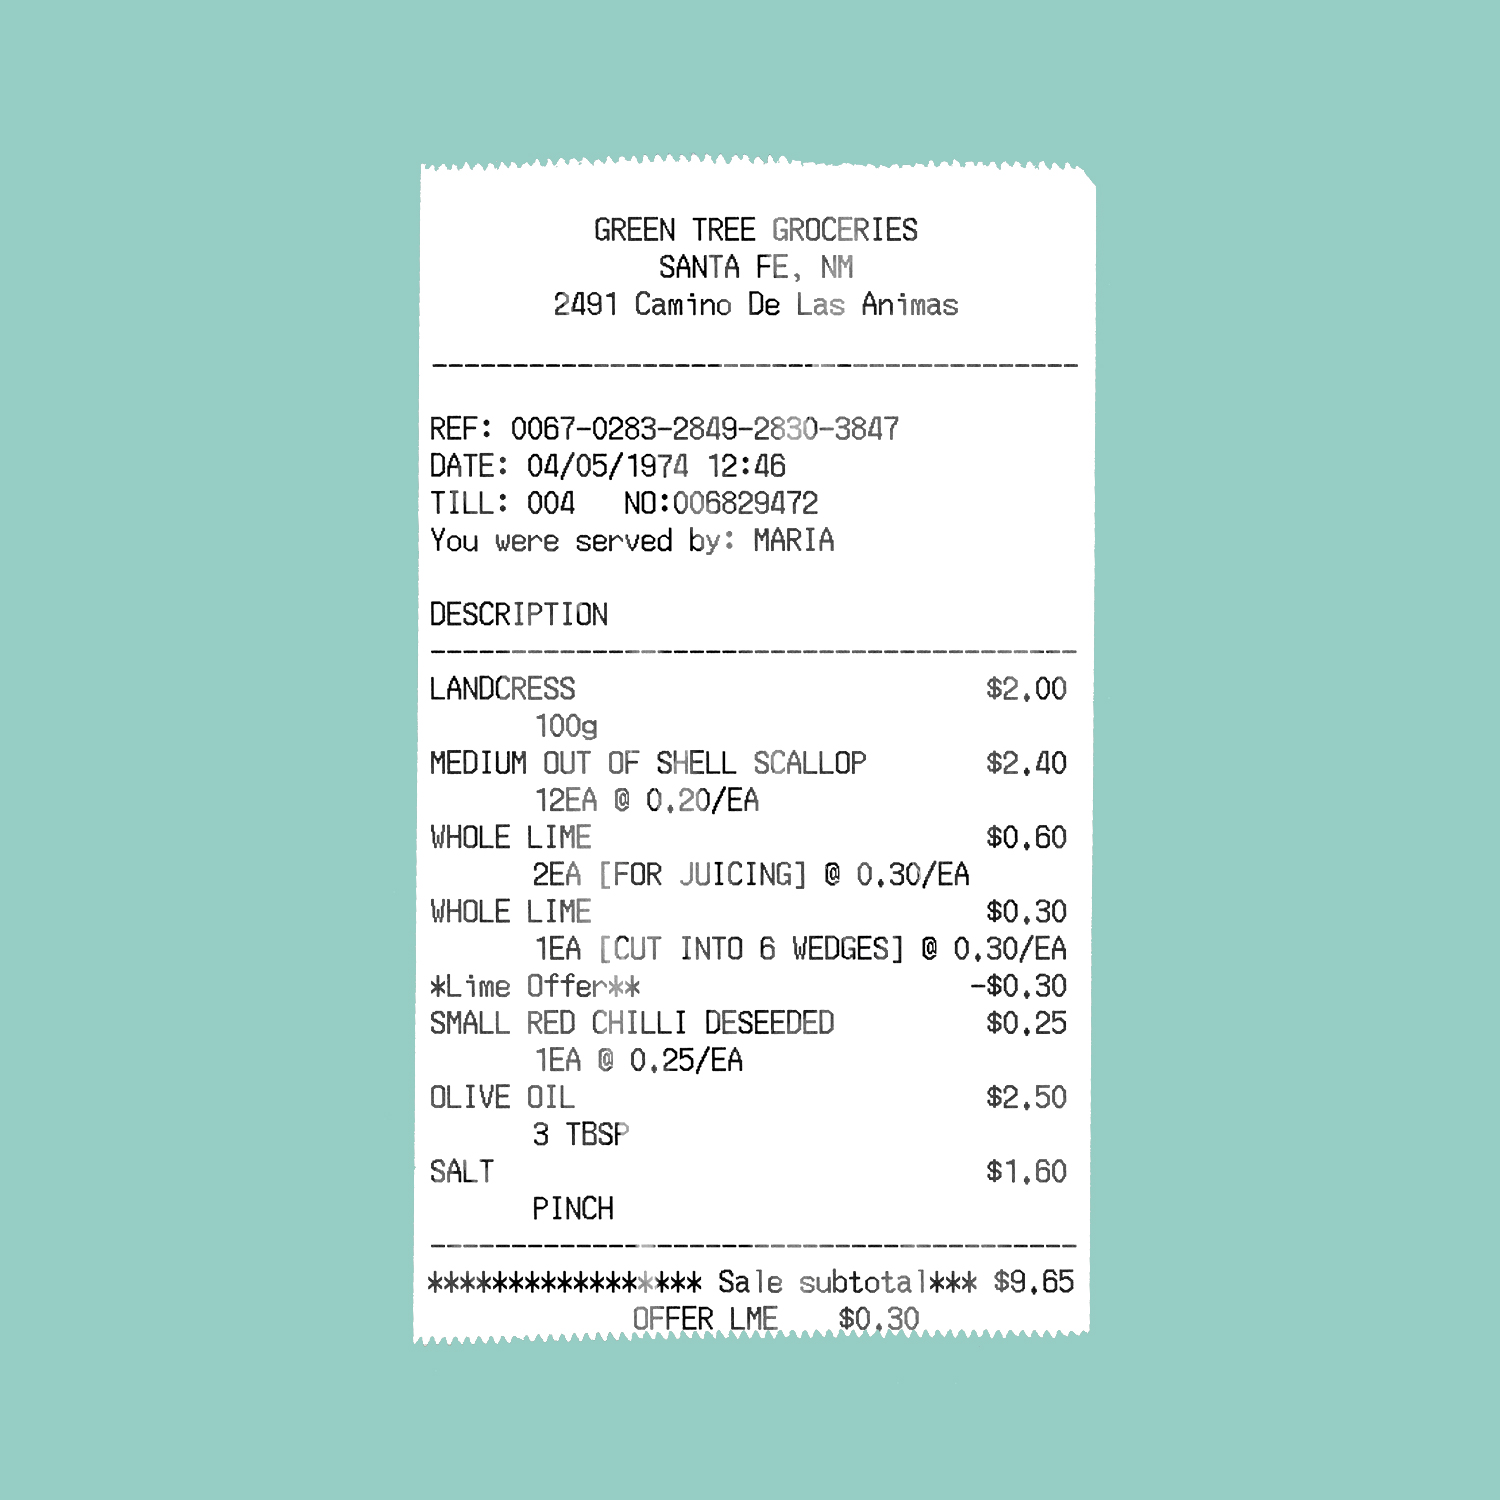 a reciept from green tree groceries